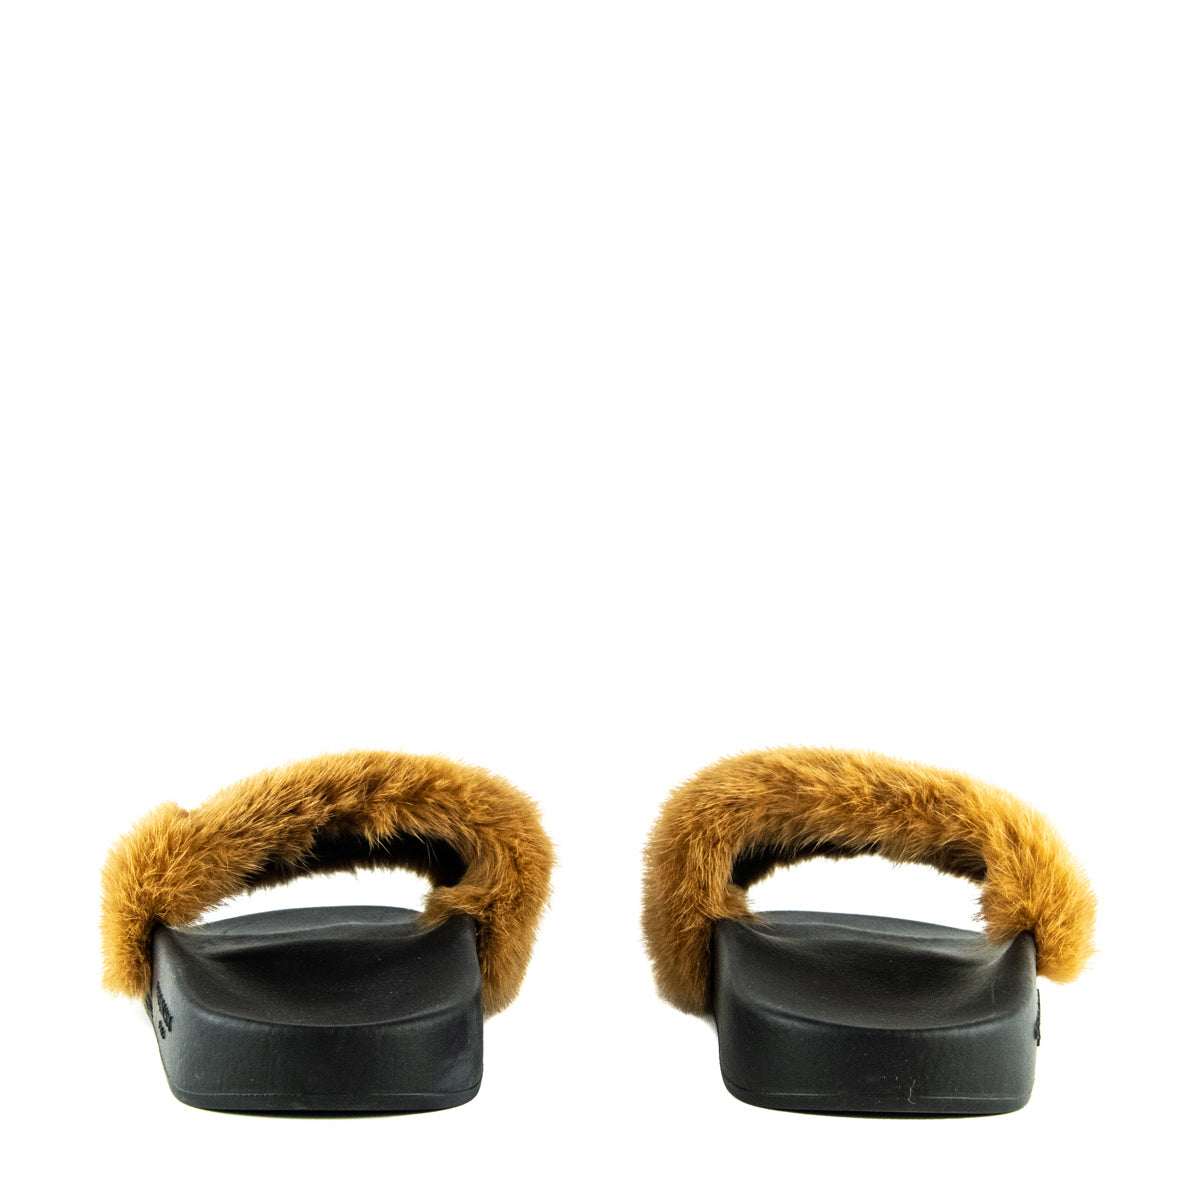 Givenchy, Shoes, Givenchy Real Mink Fur Slides Perfect Condition